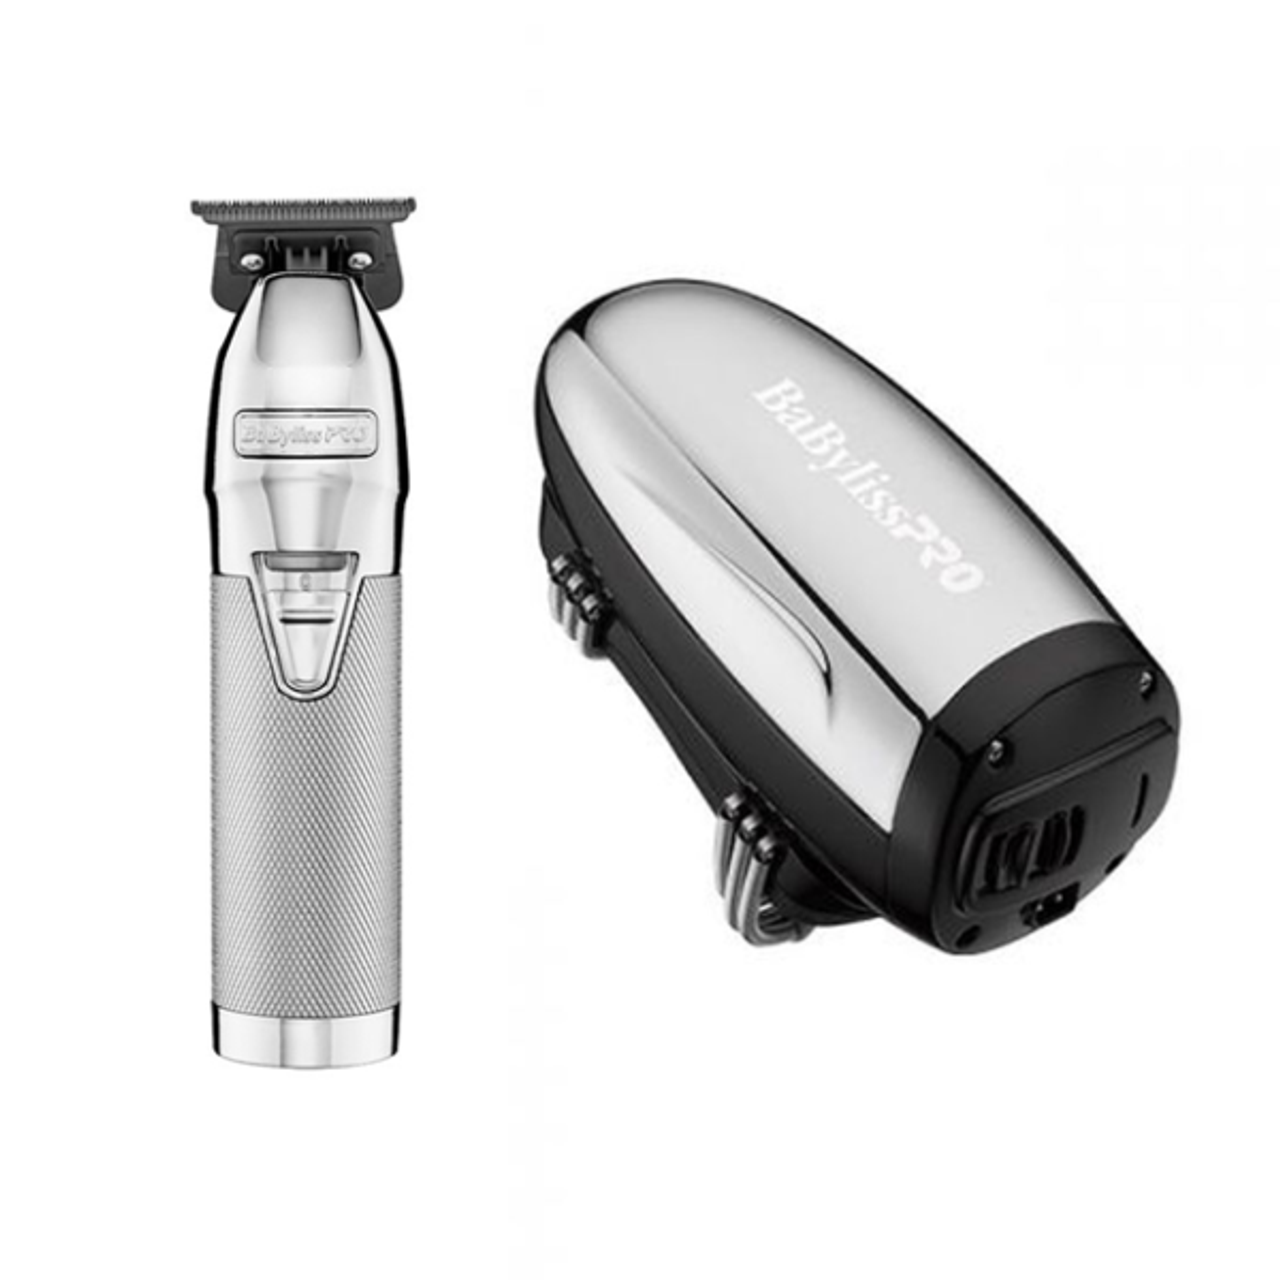 https://cdn11.bigcommerce.com/s-g57ea8t37g/images/stencil/1280x1280/products/3508/12086/babyliss-silver-combo1-600x600__22888.1634949337.png?c=2